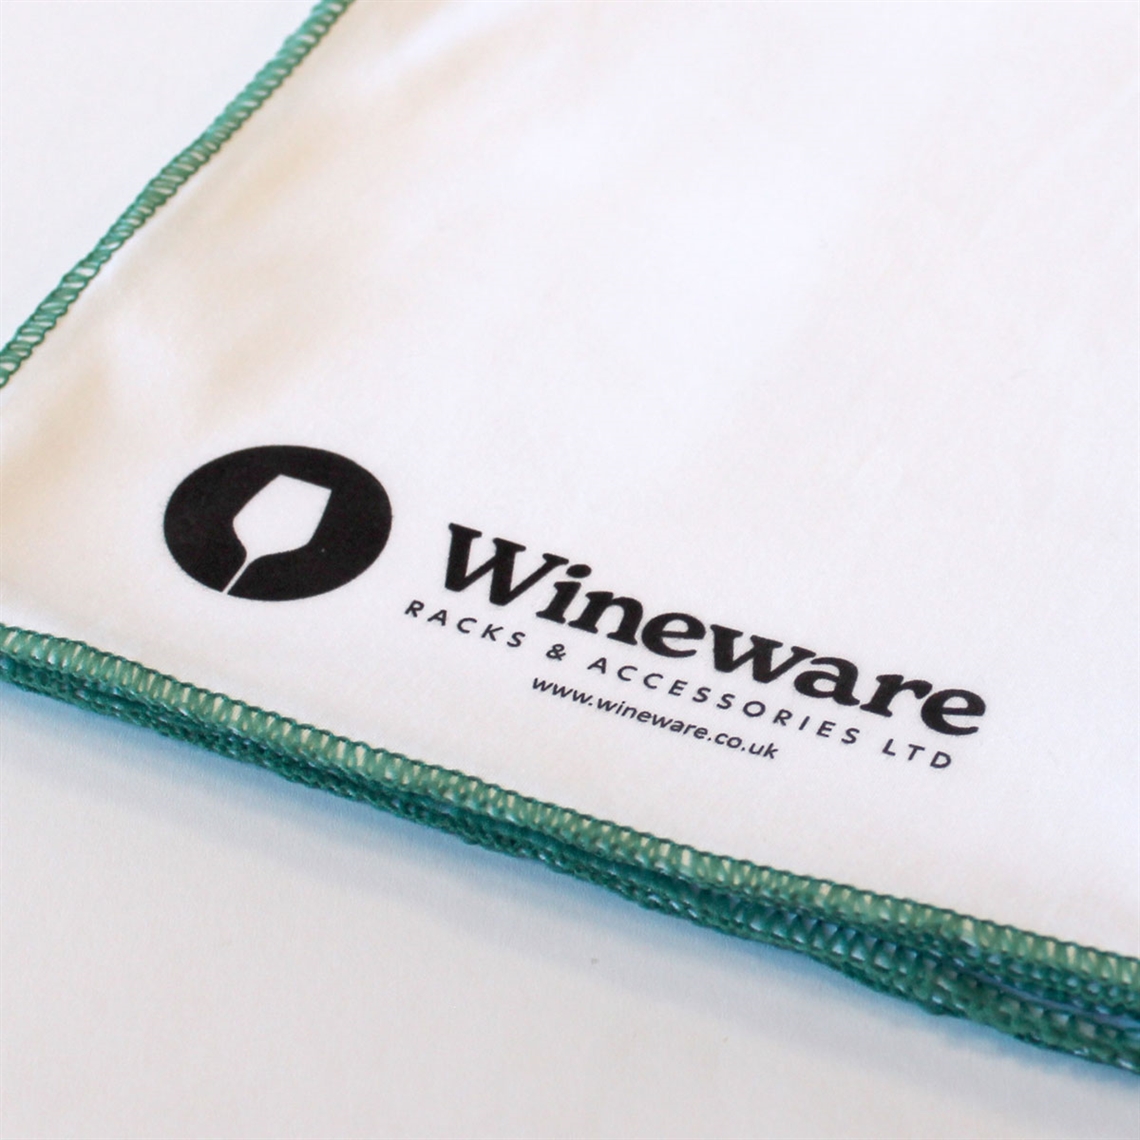 View more wine glasses by region and grape from our Wine Glass Cleaning & Accessories range